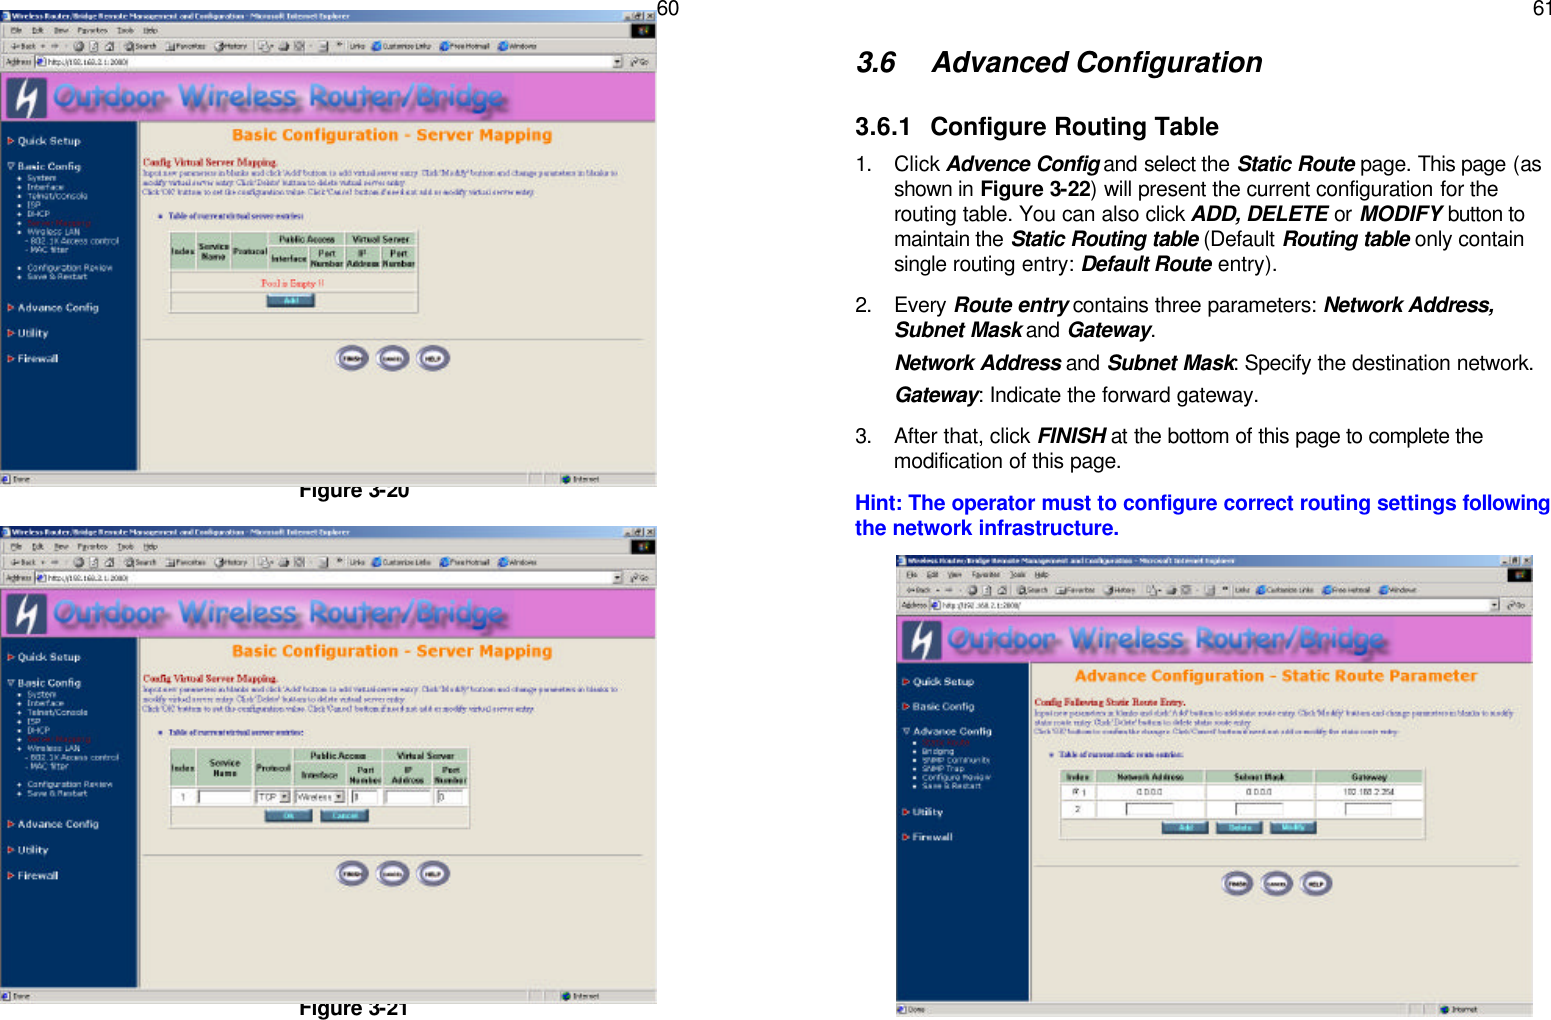   60               Figure 3-20                Figure 3-21   61 3.6 Advanced Configuration 3.6.1 Configure Routing Table 1. Click Advence Config and select the Static Route page. This page (as shown in Figure 3-22) will present the current configuration for the routing table. You can also click ADD, DELETE or MODIFY button to maintain the Static Routing table (Default Routing table only contain single routing entry: Default Route entry). 2. Every Route entry contains three parameters: Network Address, Subnet Mask and Gateway.  Network Address and Subnet Mask: Specify the destination network. Gateway: Indicate the forward gateway. 3. After that, click FINISH at the bottom of this page to complete the modification of this page. Hint: The operator must to configure correct routing settings following the network infrastructure.                     